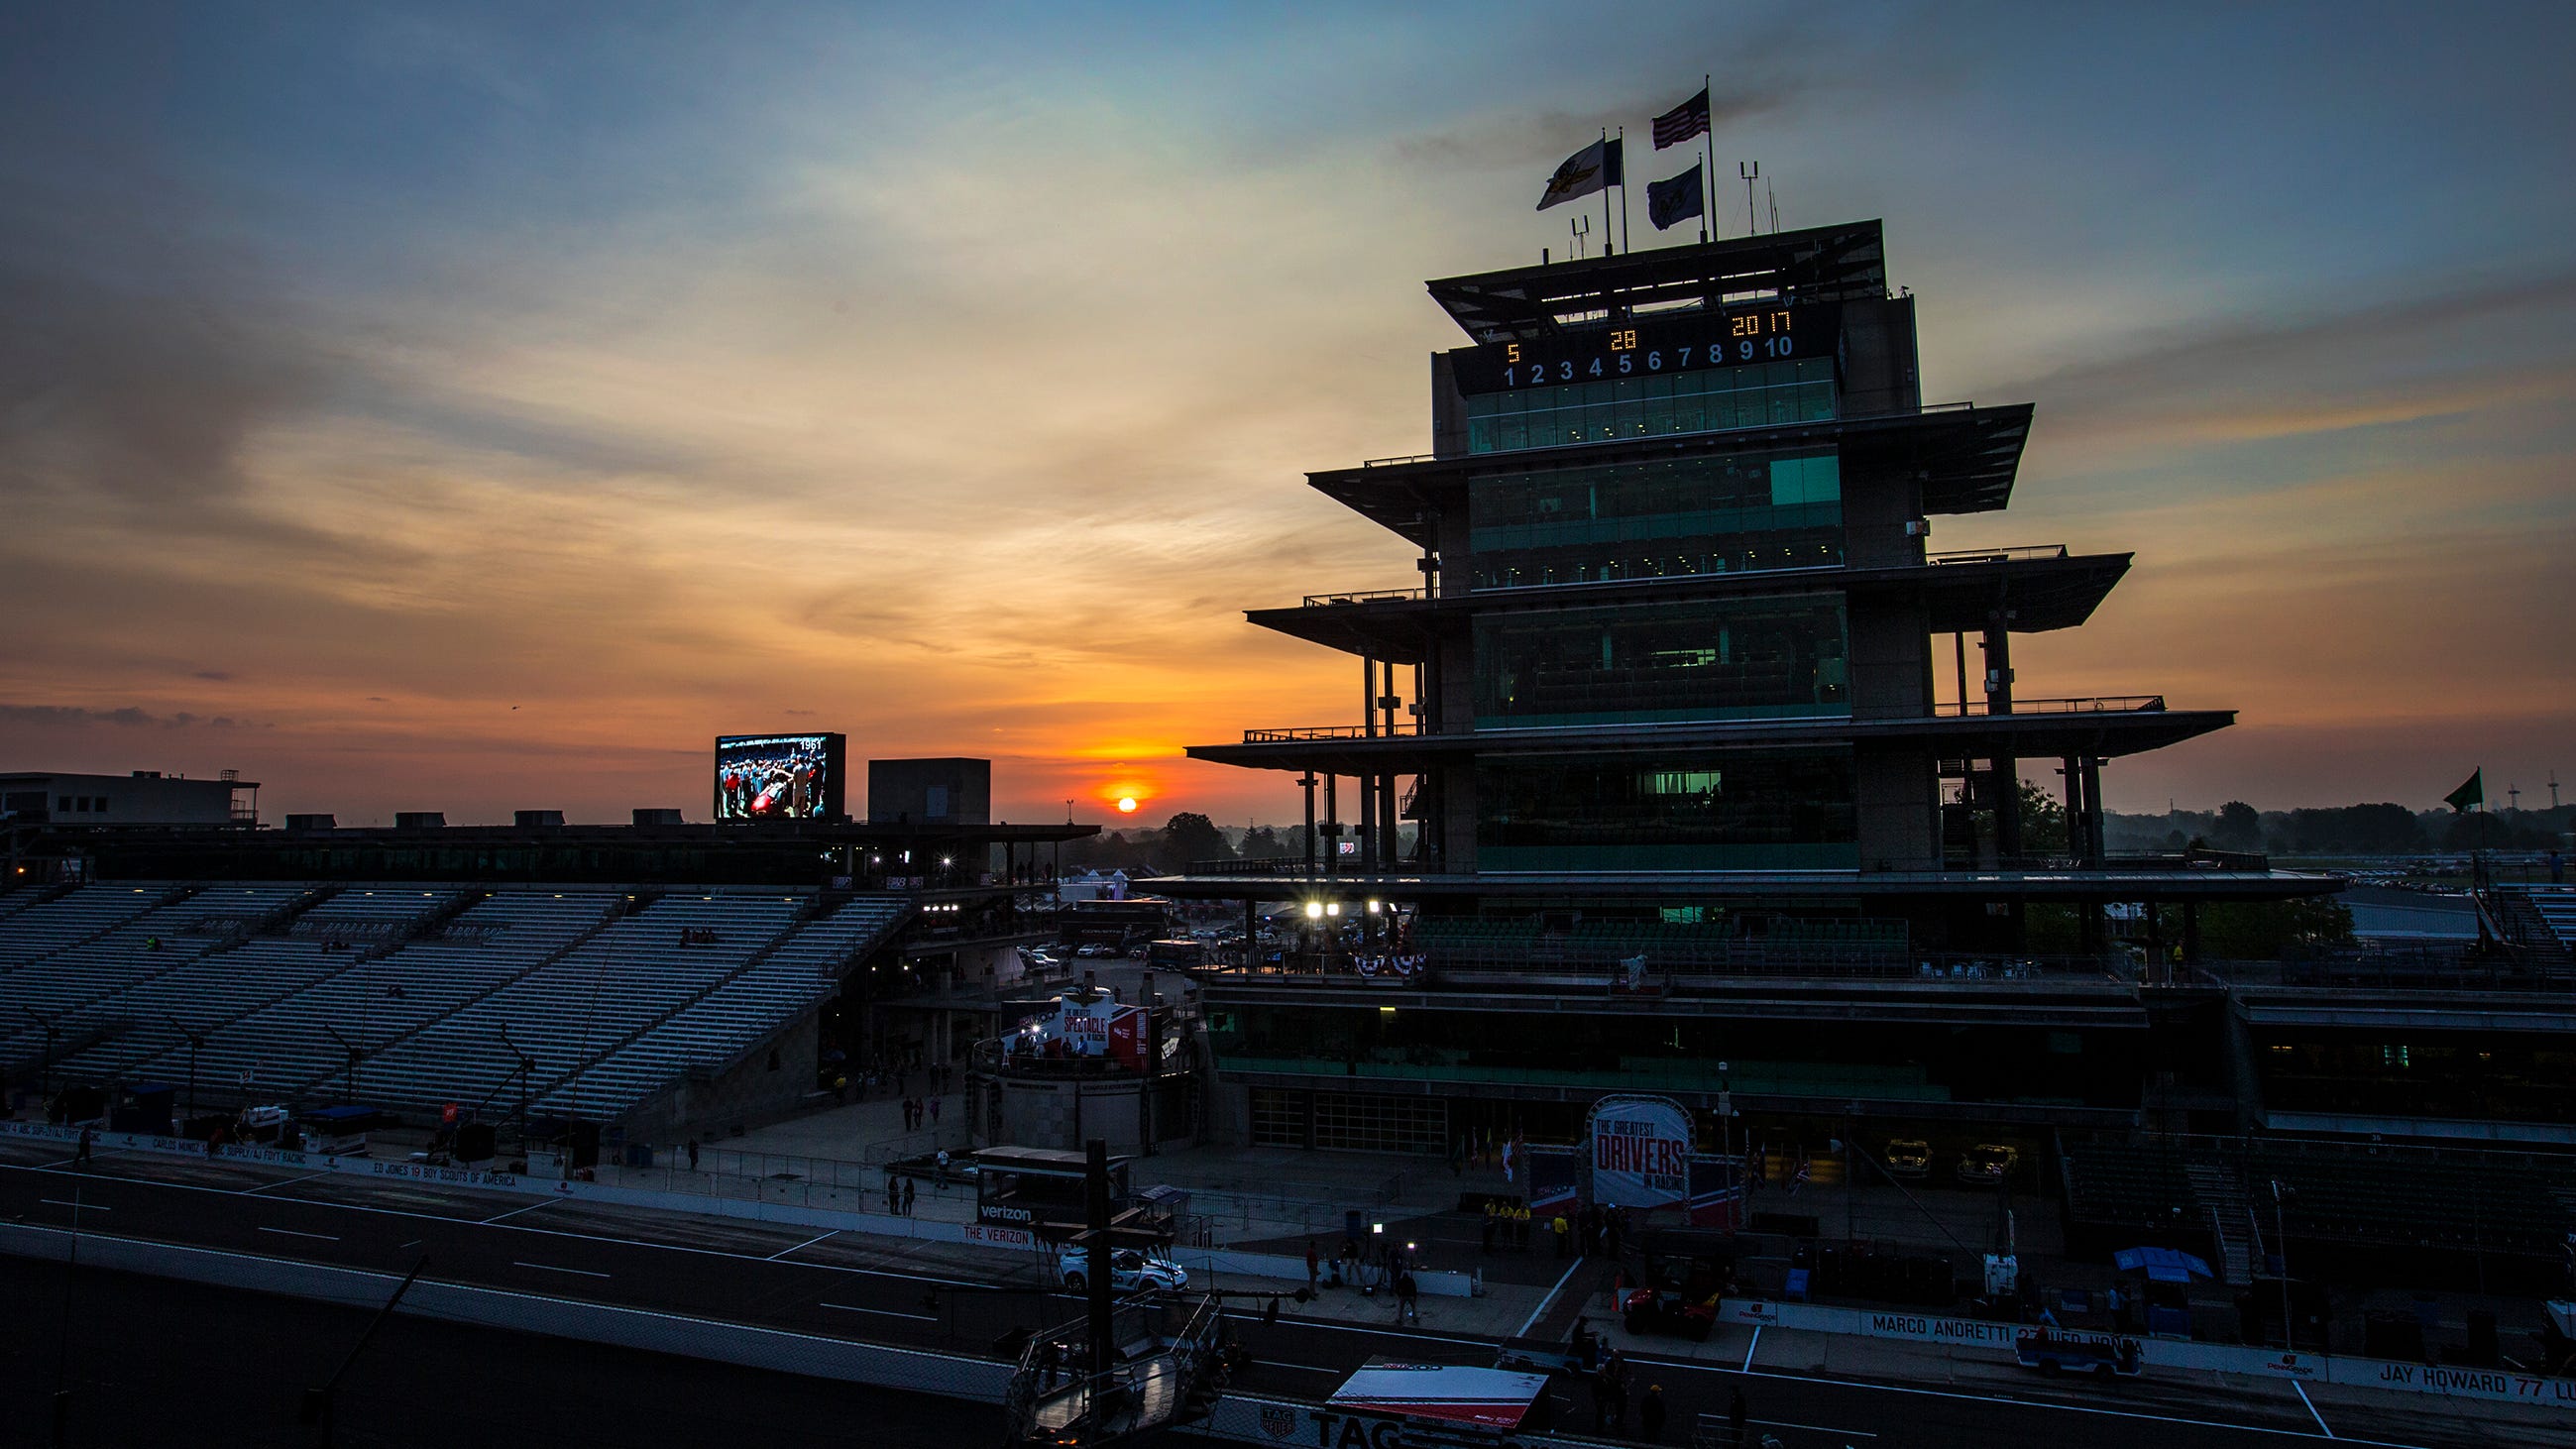   
																2022 Indy 500 field has a rare mix of experience and youth 
															 